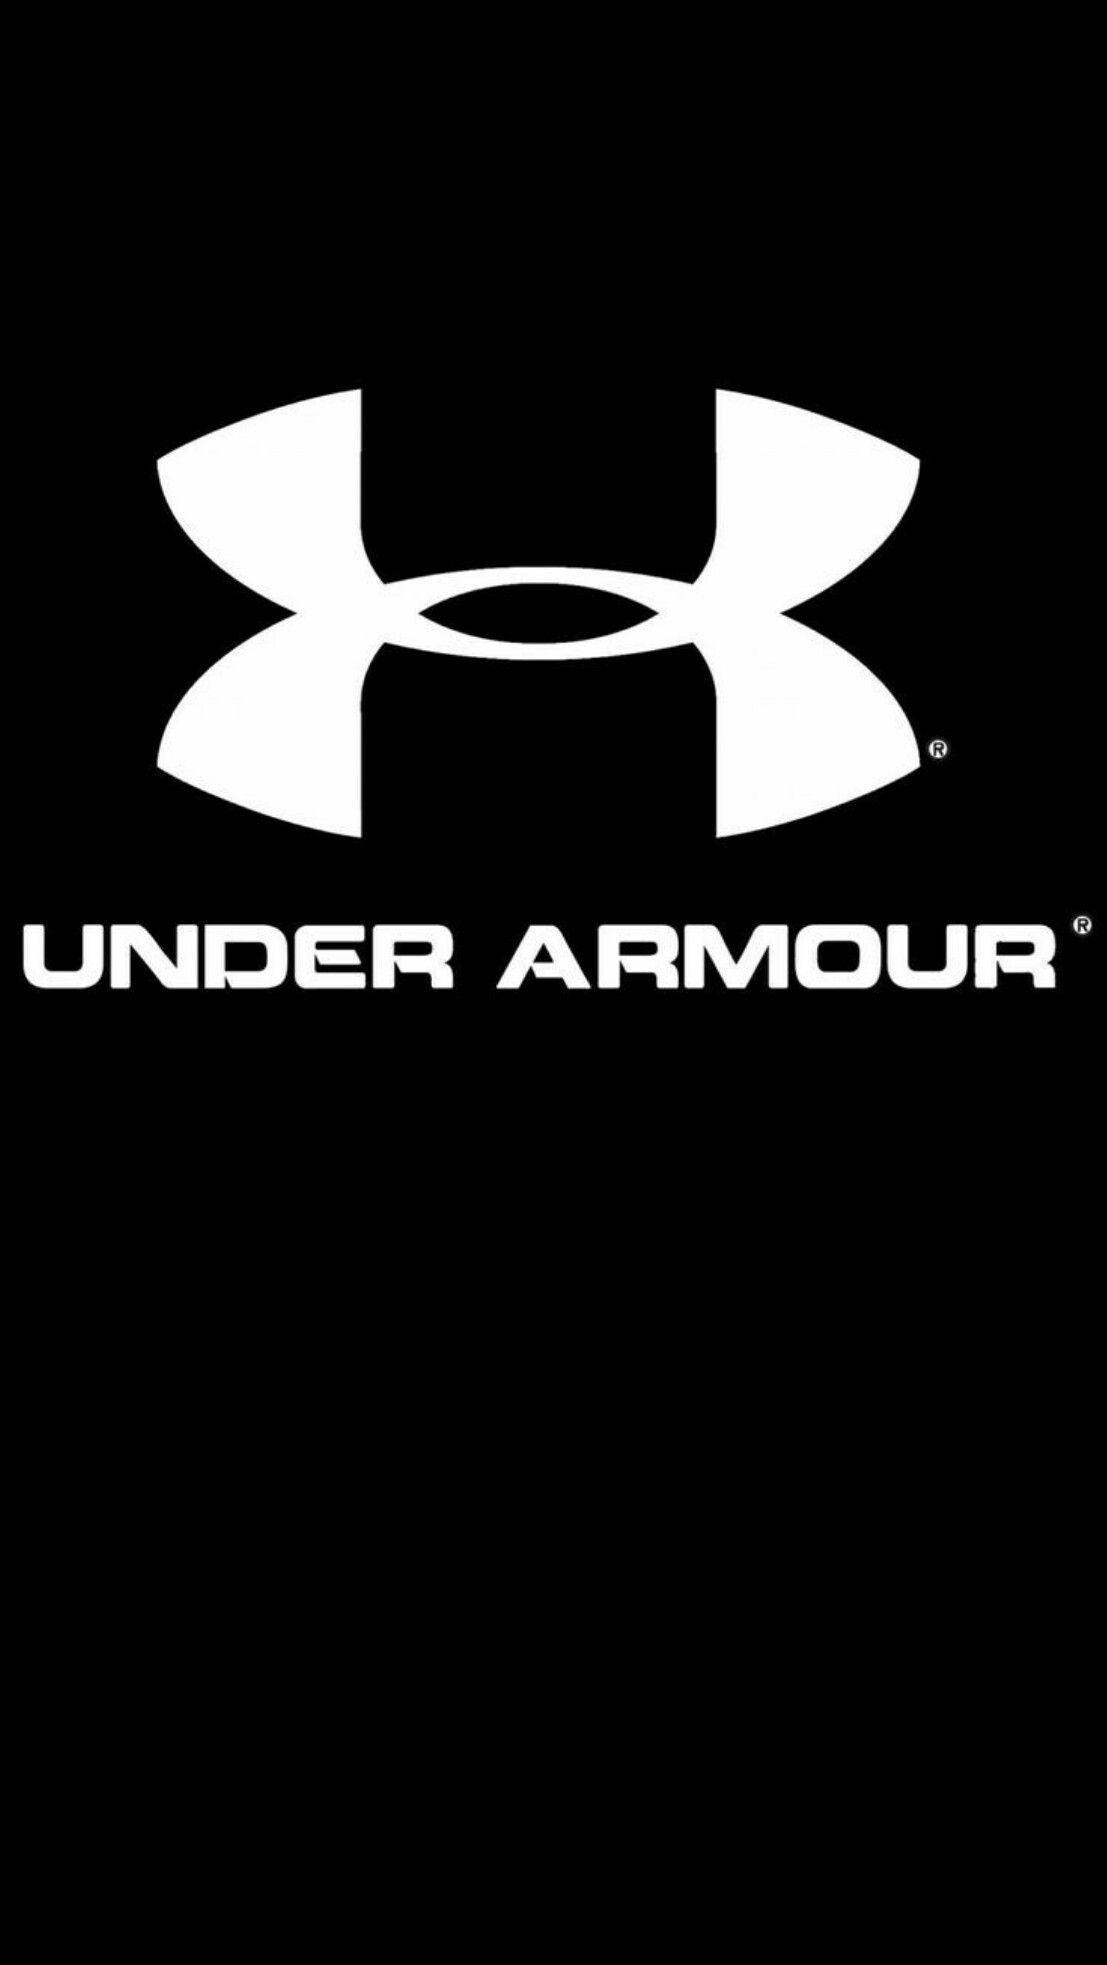 Under Armour Wallpapers - Wallpaper